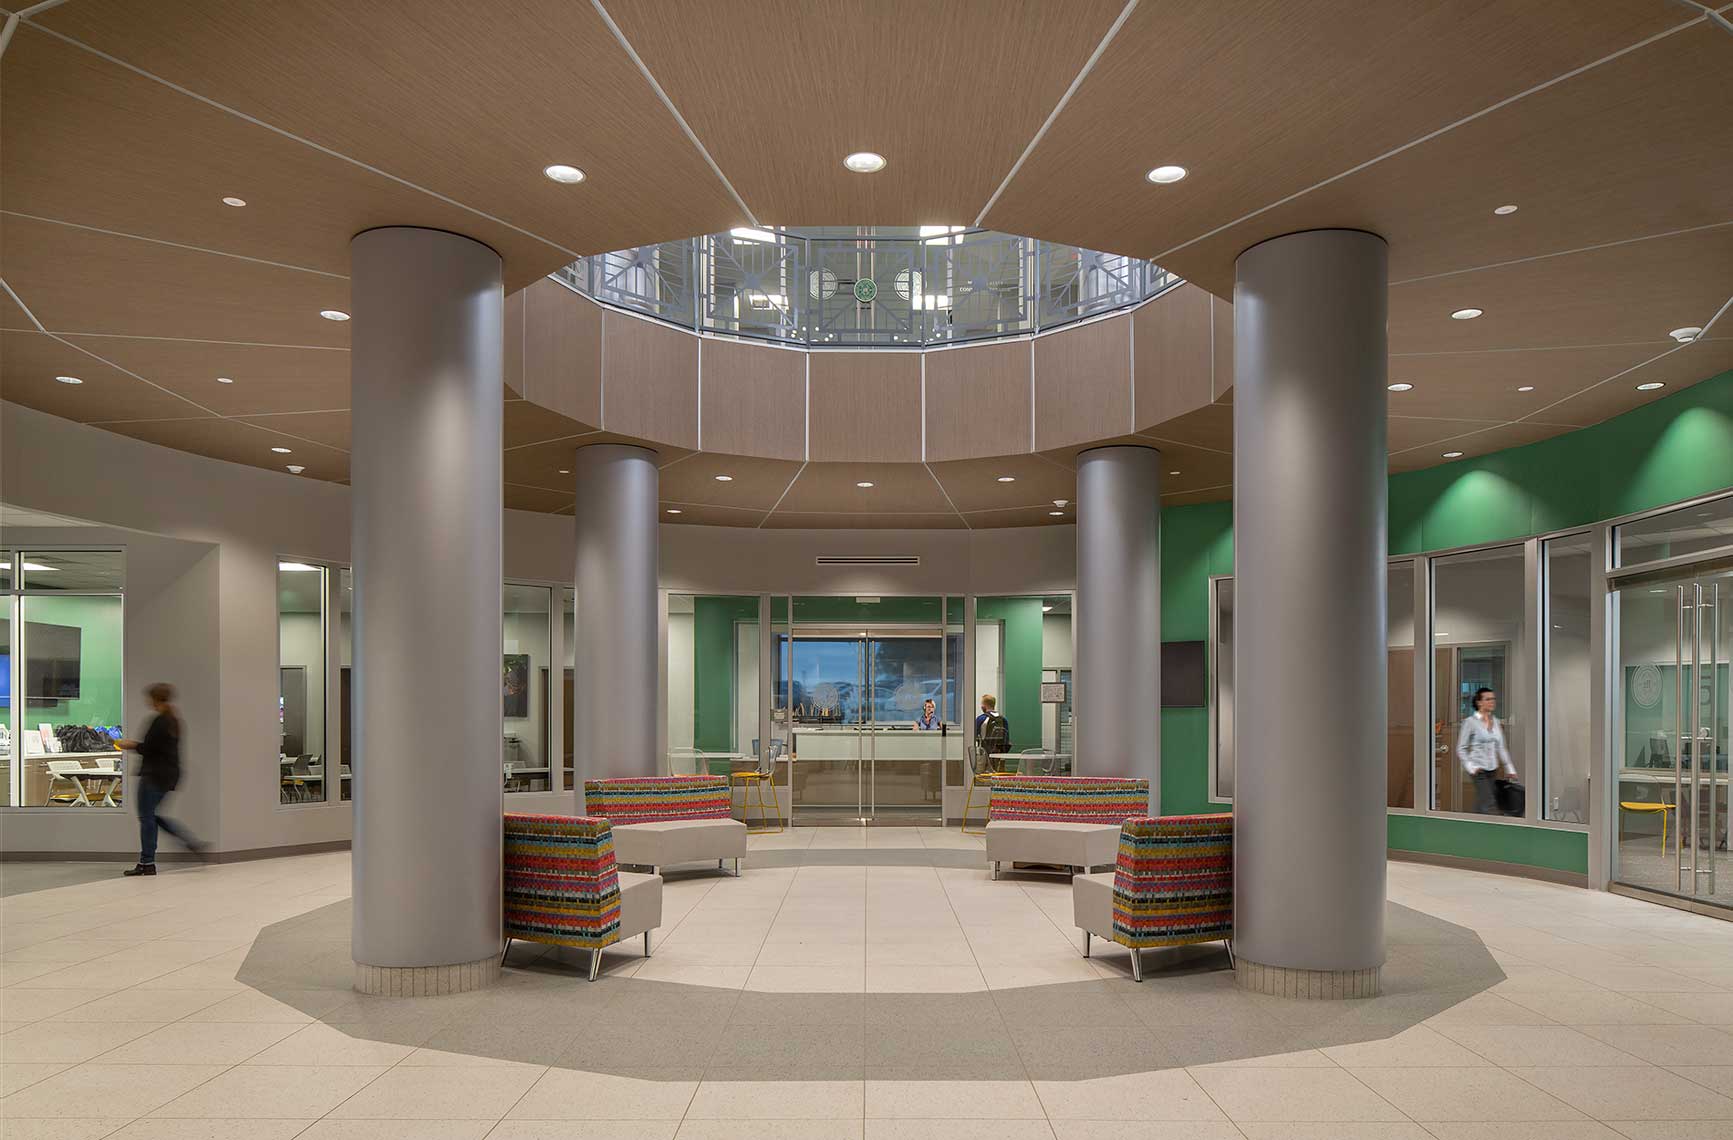 The Rotunda at Motlow State Community College in Smyrna, Tennessee